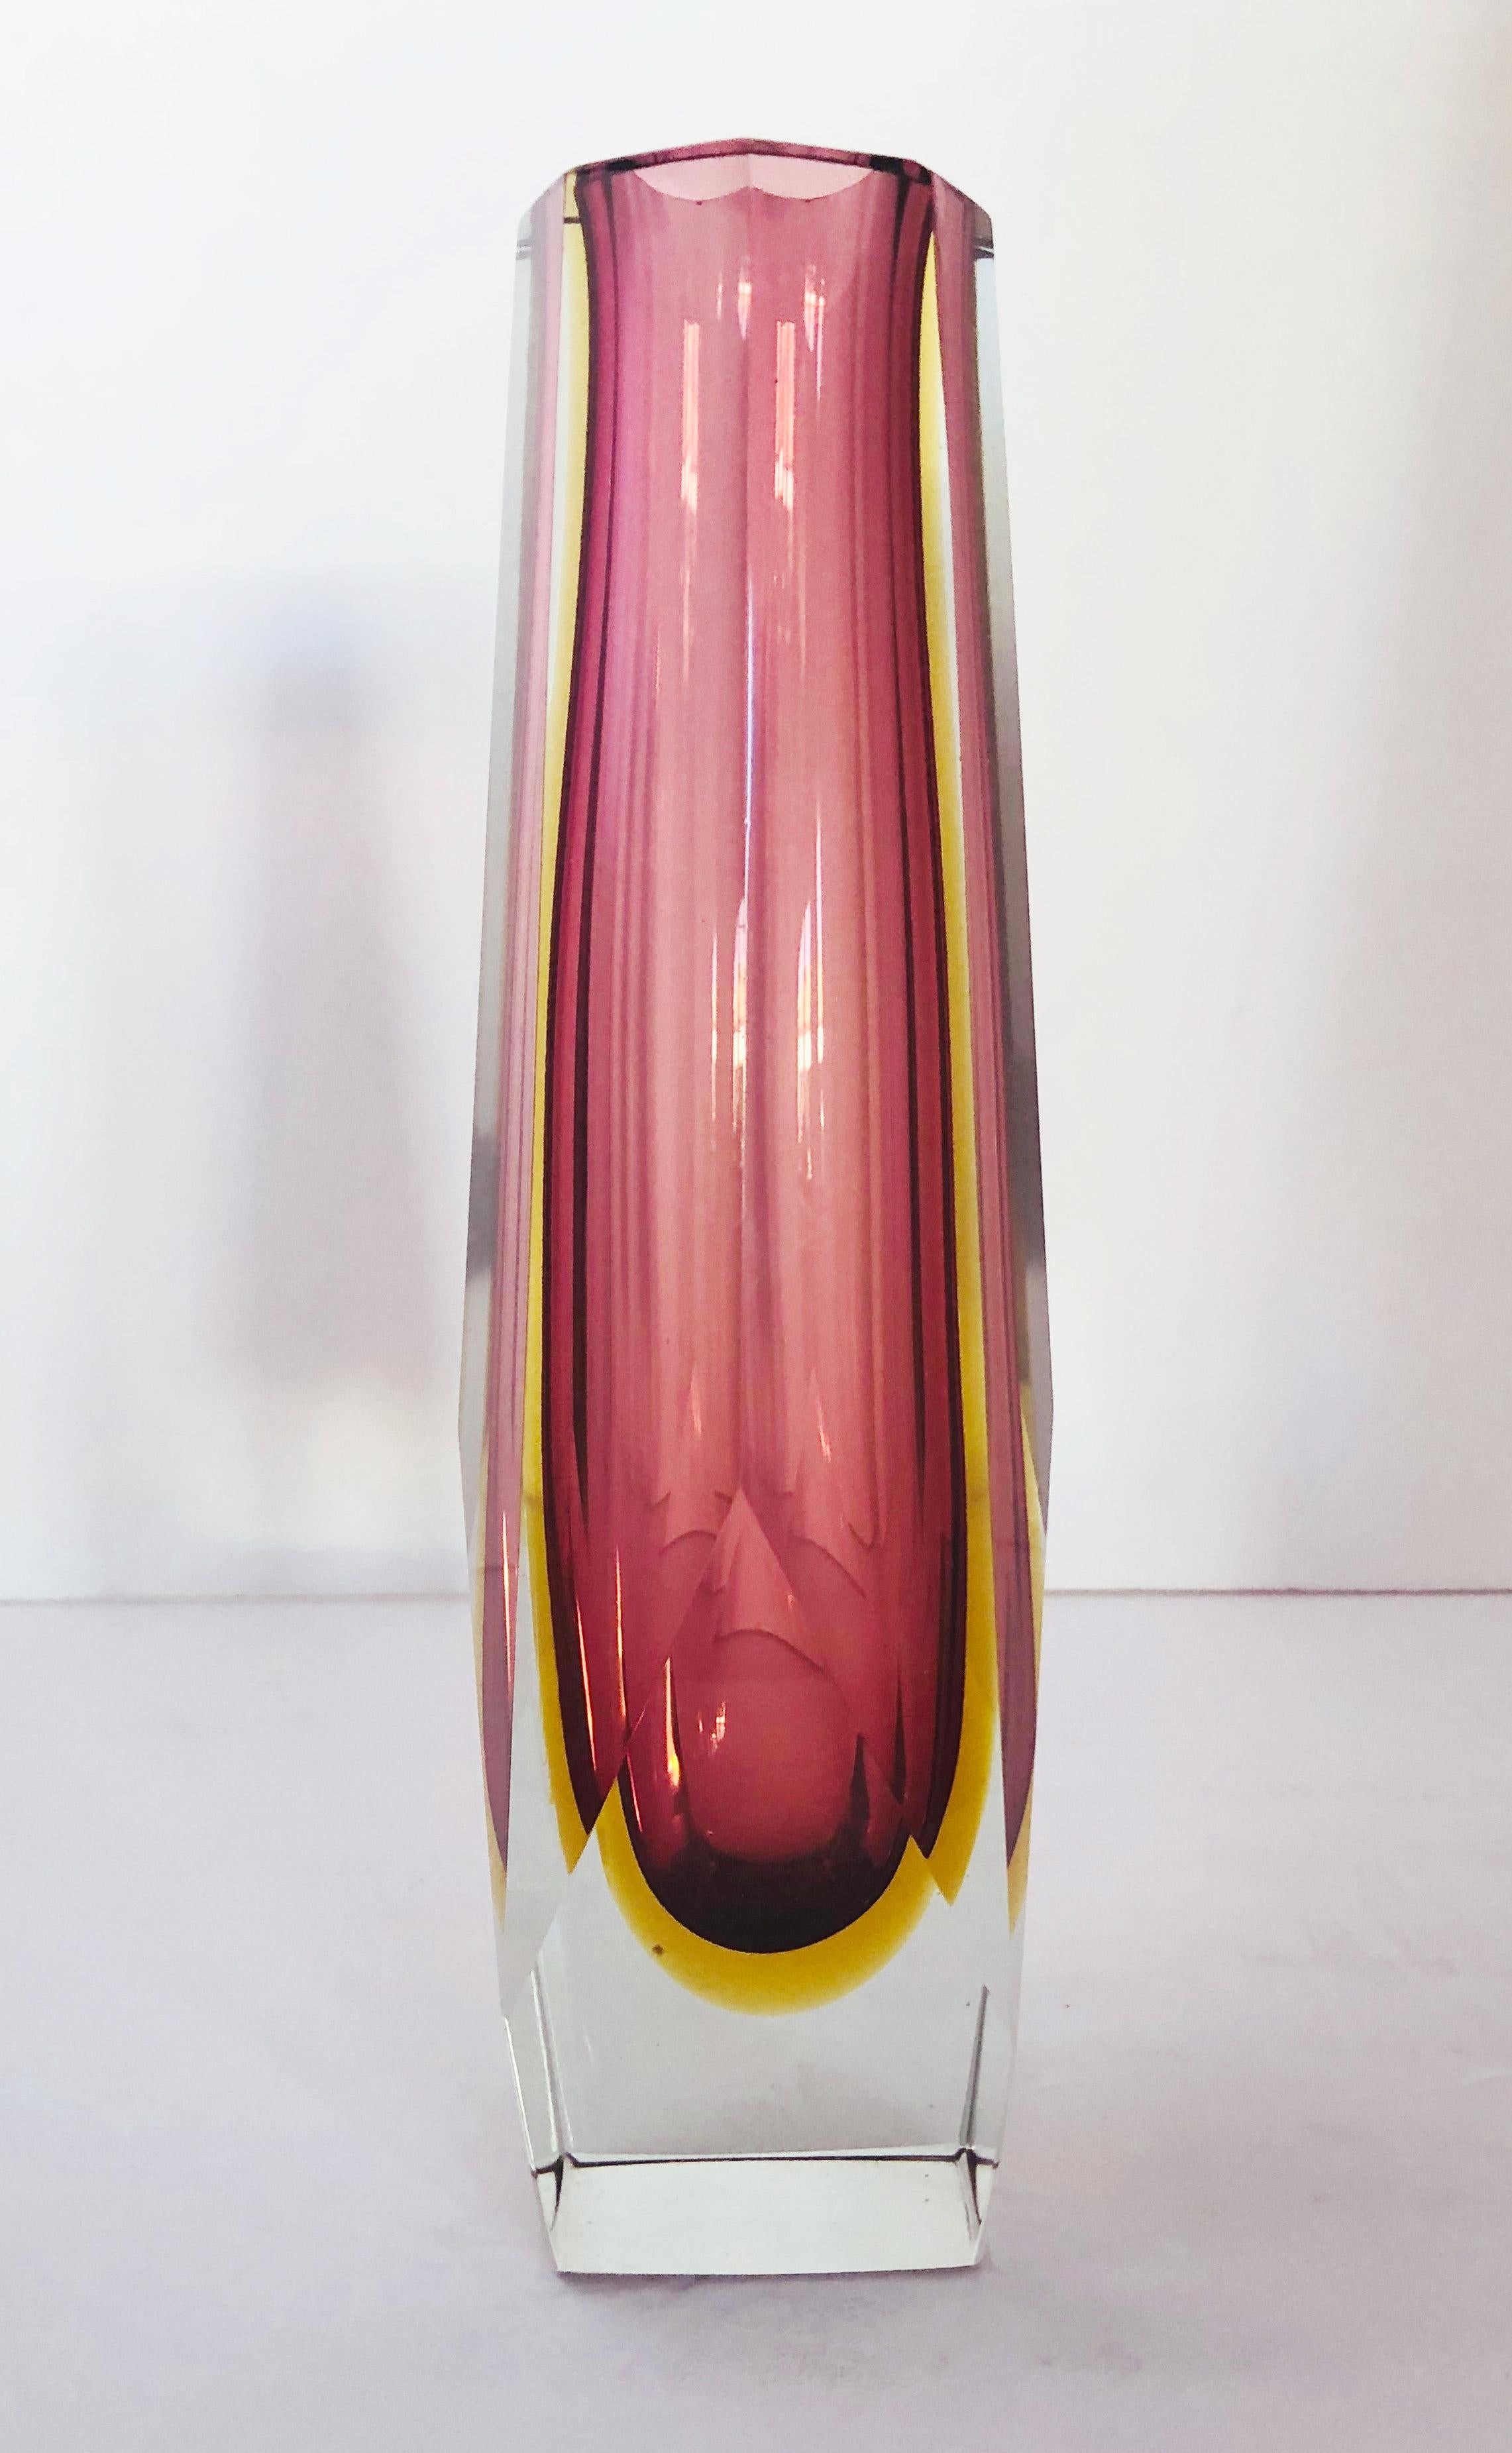 Vintage Italian faceted Murano glass vase blown in Sommerso technique, with amber and pink amethyst colors Designed by Mandruzzato circa 1960s / Made in Italy
Measures: Height 11.5 inches, diameter 4 inches
1 in stock in Palm Springs currently ON